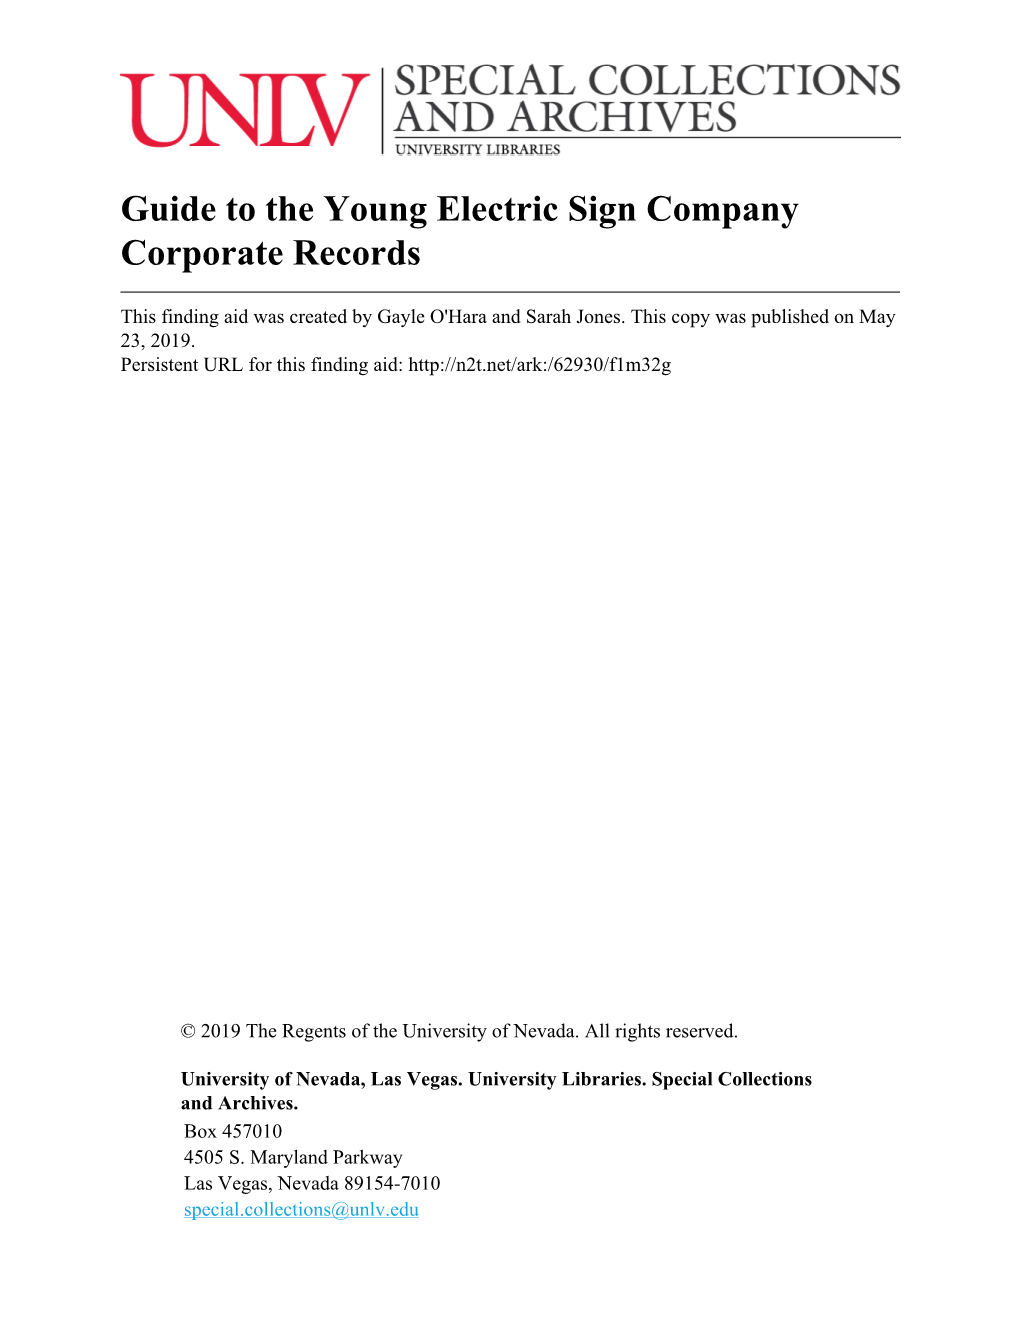 Guide to the Young Electric Sign Company Corporate Records